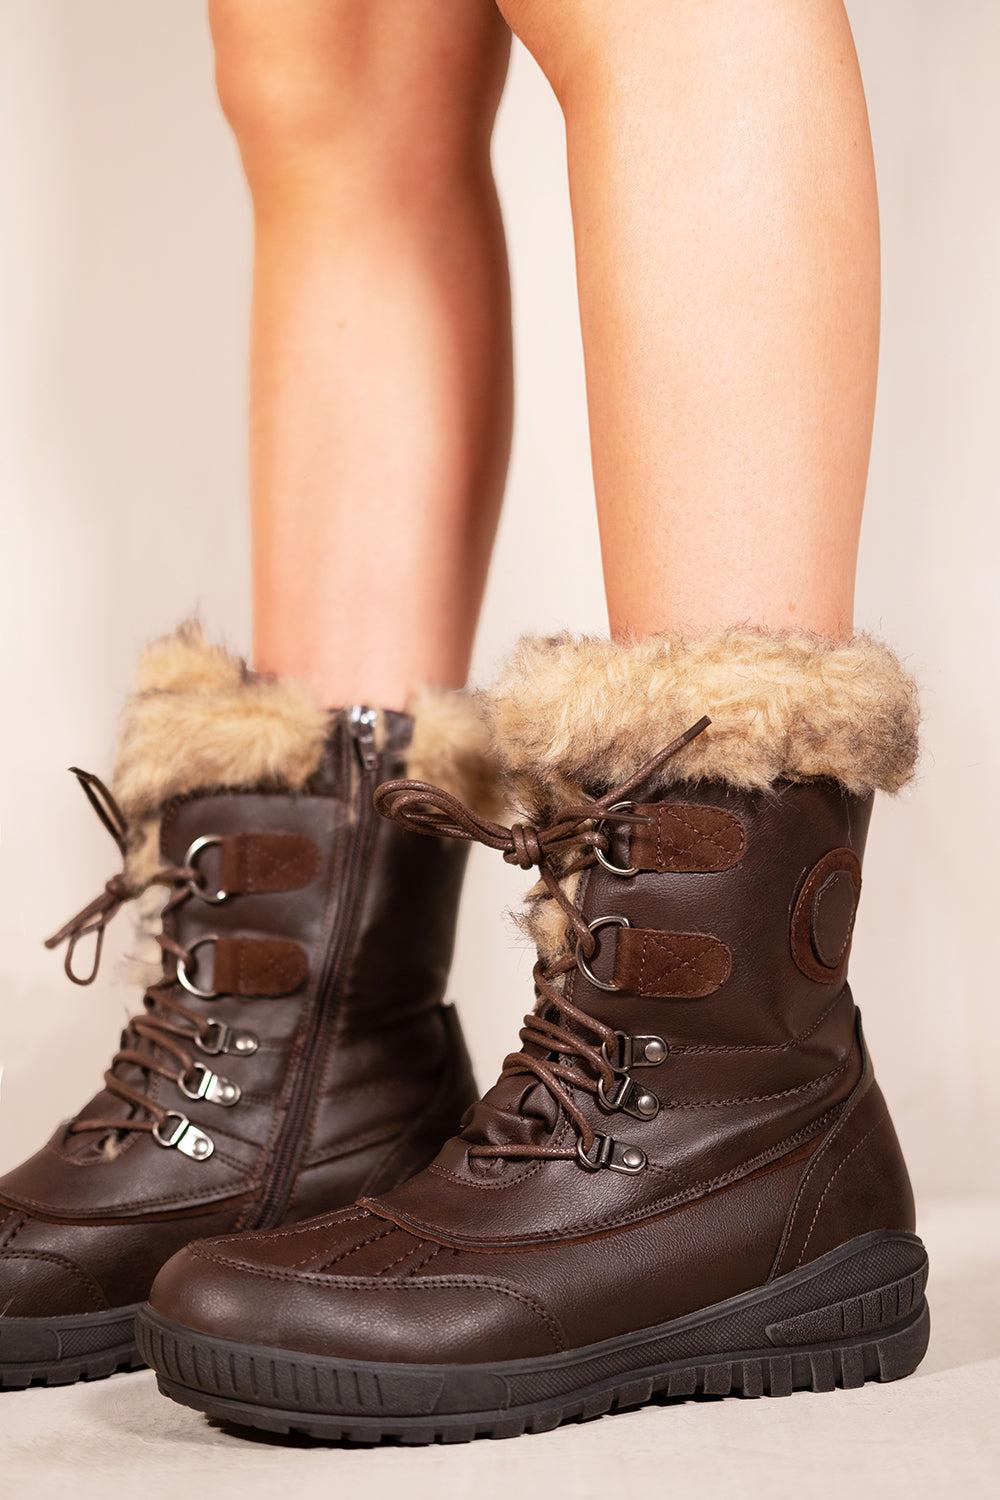 Where's That From Clarrisa Flatform Fur Lined Ankle Boots With Lace Up in  Brown | Lyst